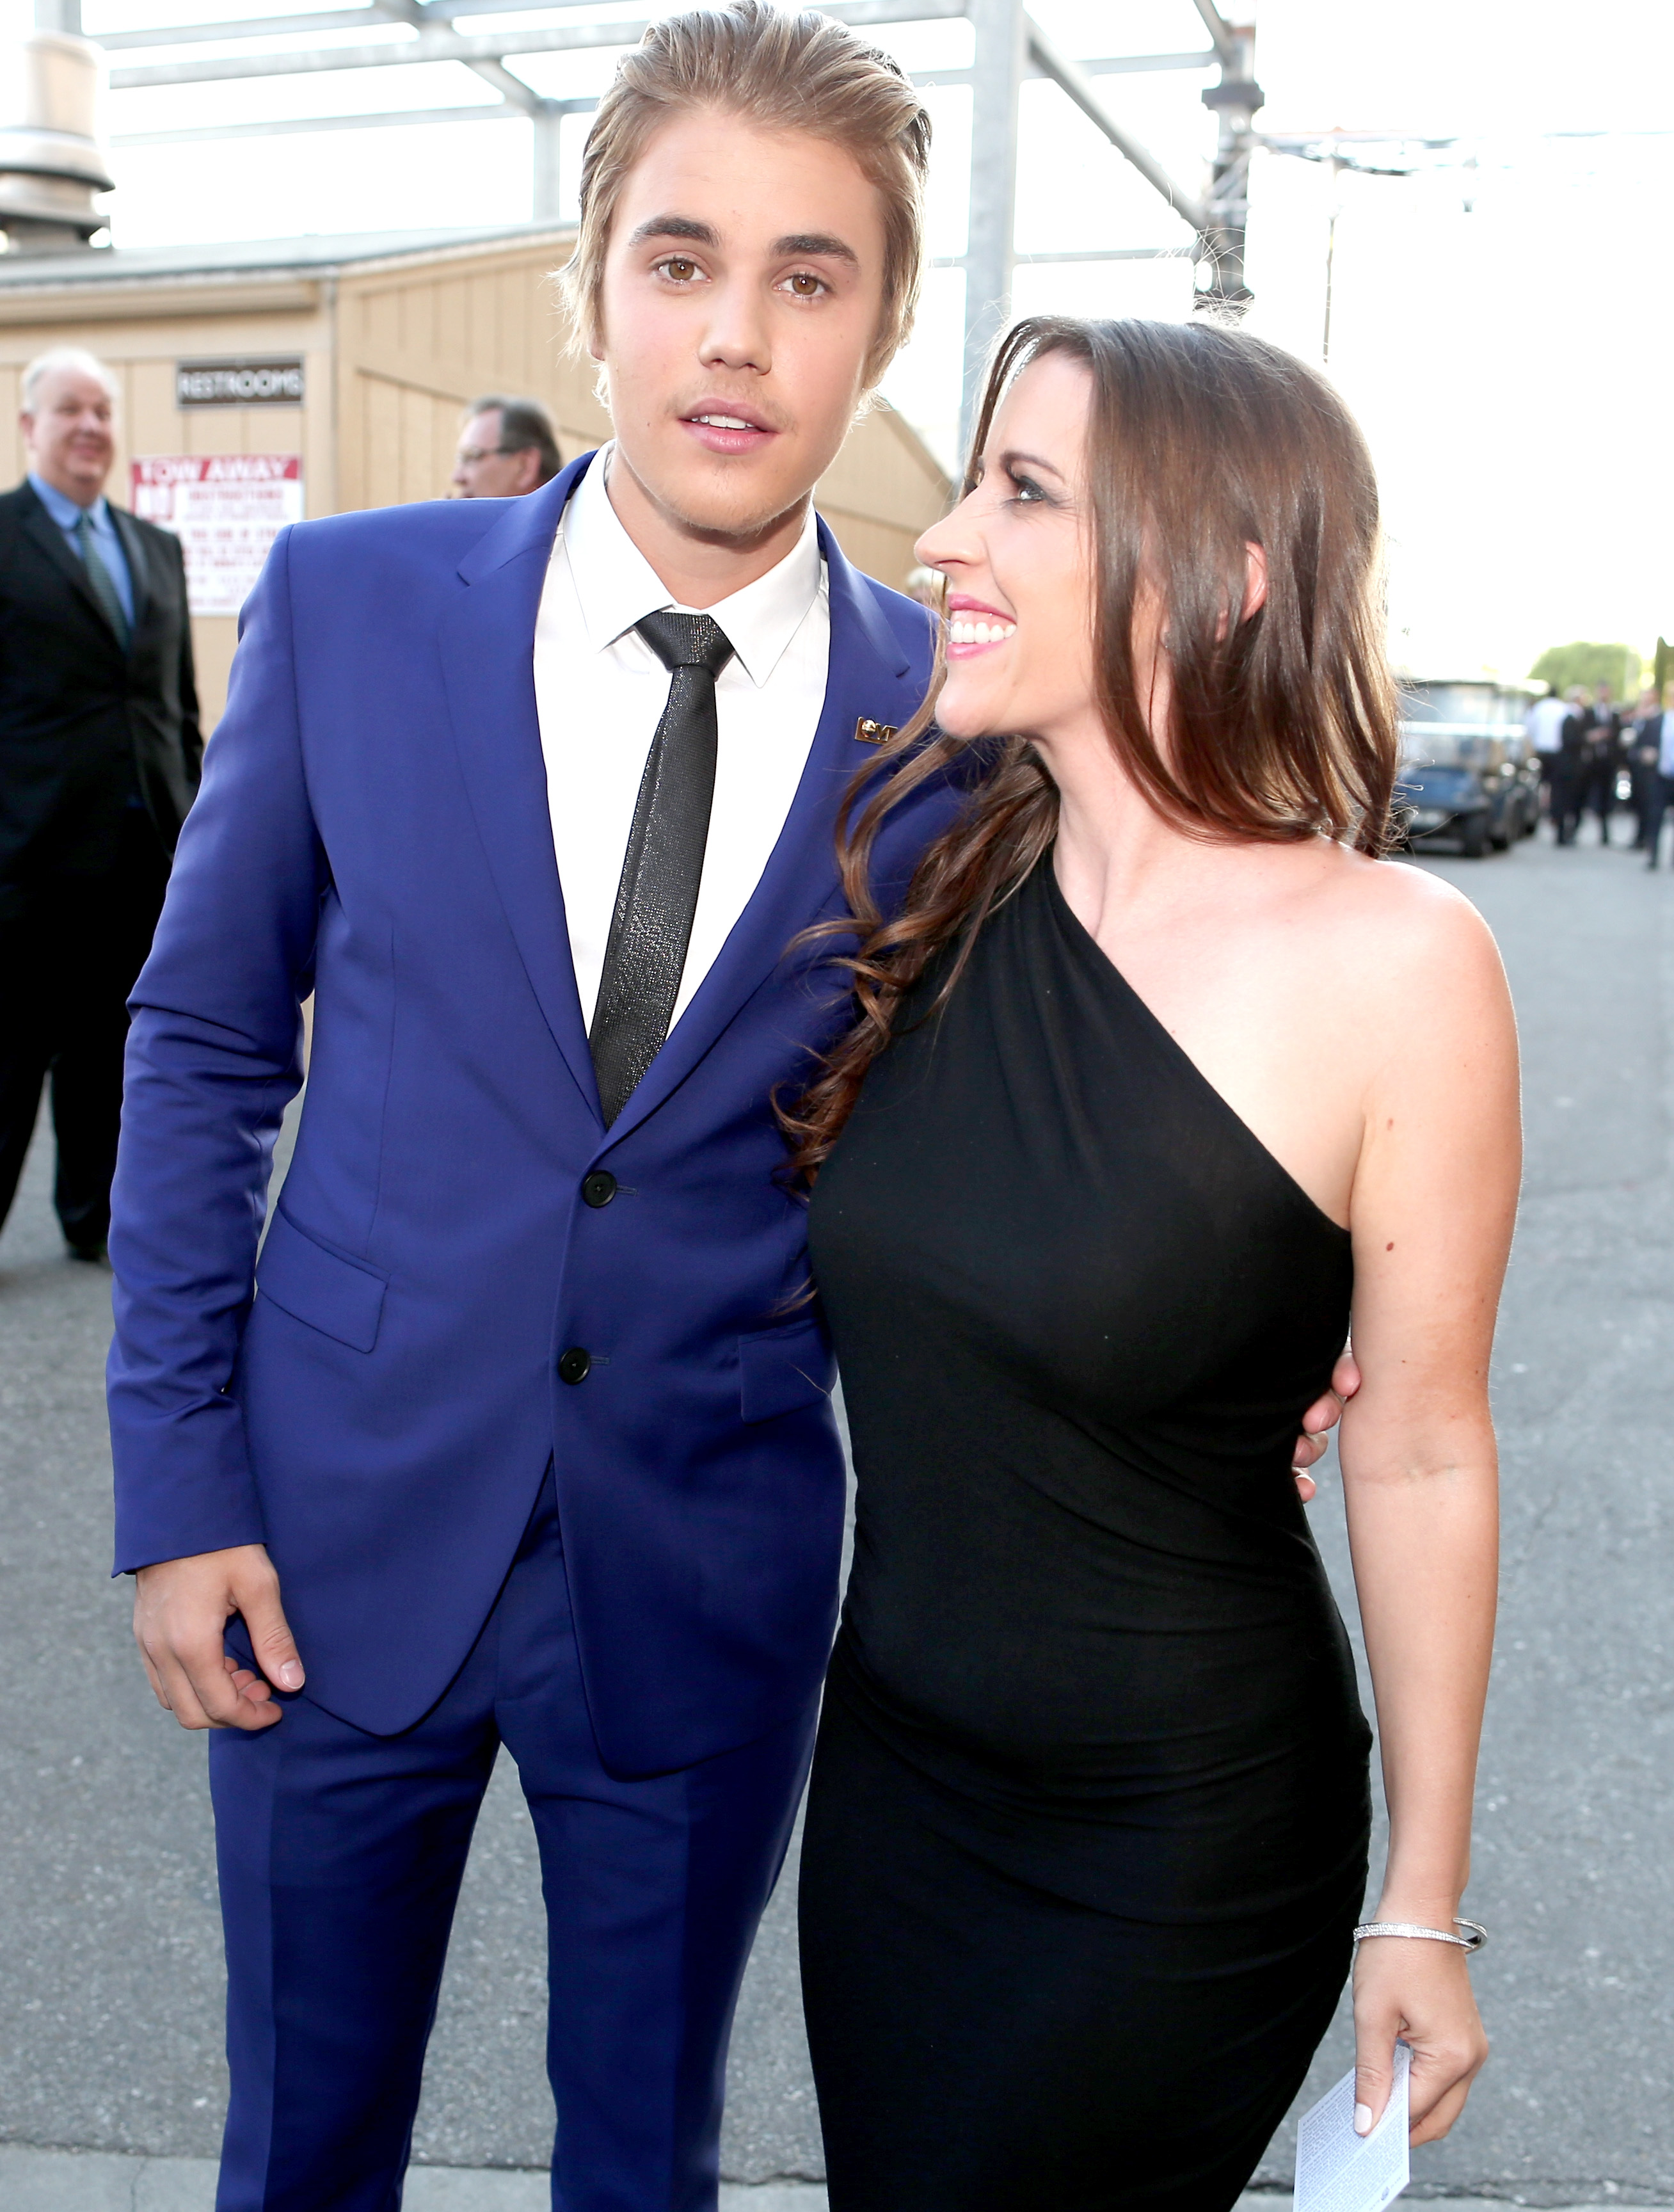 Justin Bieber and Pattie Mallette attend The Comedy Central Roast of Justin Bieber at Sony Pictures Studios in Los Angeles, California, on March 14, 2015. | Source: Getty Images